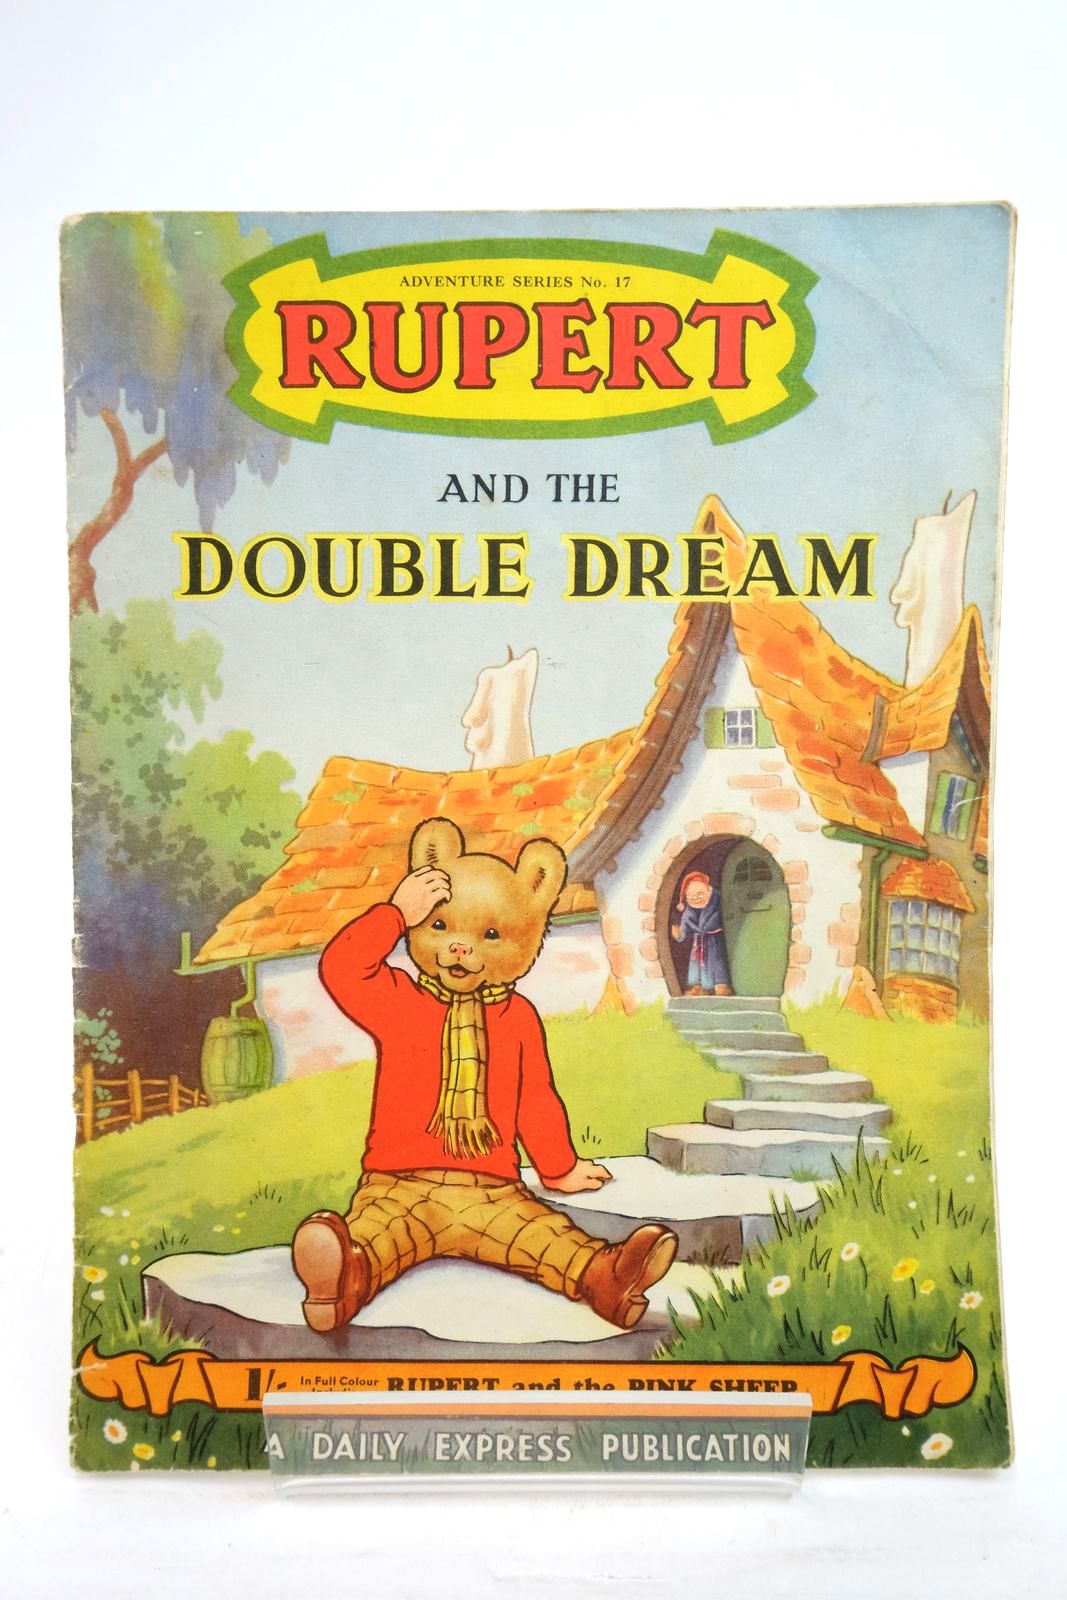 Photo of RUPERT ADVENTURE SERIES No. 17 - RUPERT AND THE DOUBLE DREAM- Stock Number: 2137194